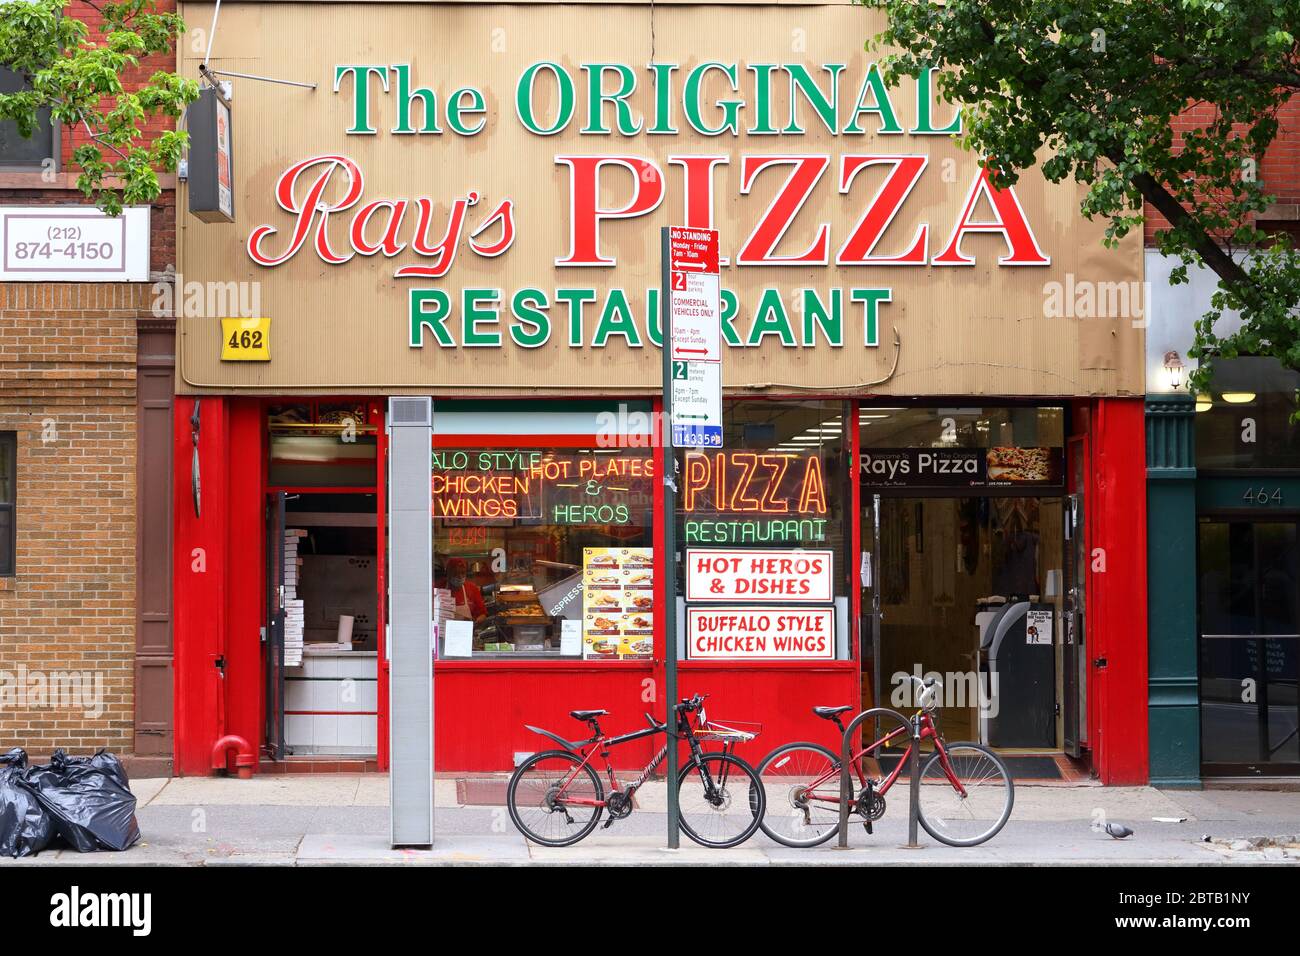 Famous Original Ray's Pizza, 462 Columbus Avenue, New York, NYC storefront photo of a pizzeria in the Upper West Side neighborhood of Manhattan. Stock Photo